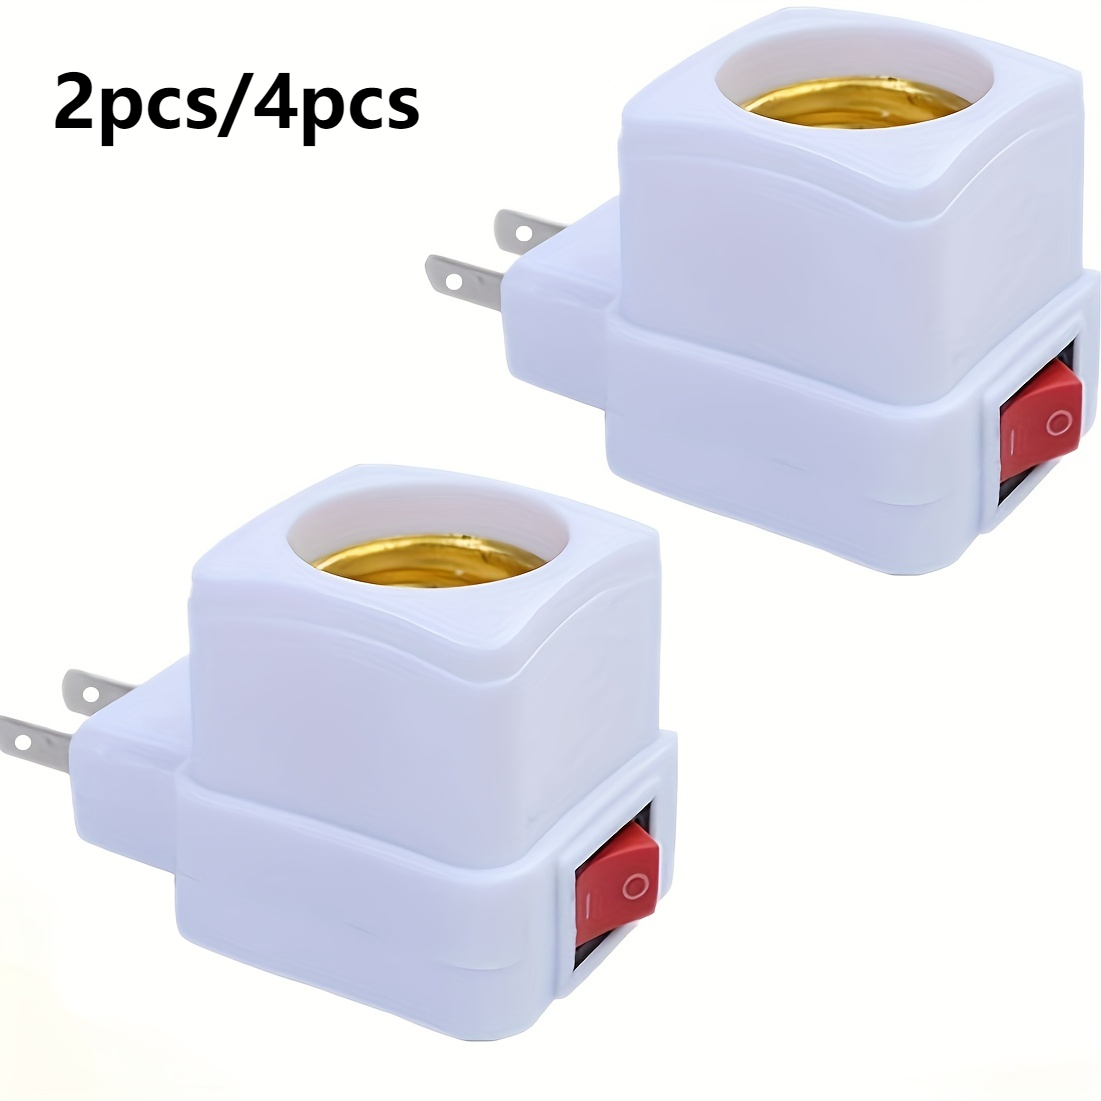 

2/4pcs E26/e27 Socket Extension Adapter: Convert Outlet To Light Bulb Socket, Maximum Wattage 60w, With Switch & Plug-in Light Socket